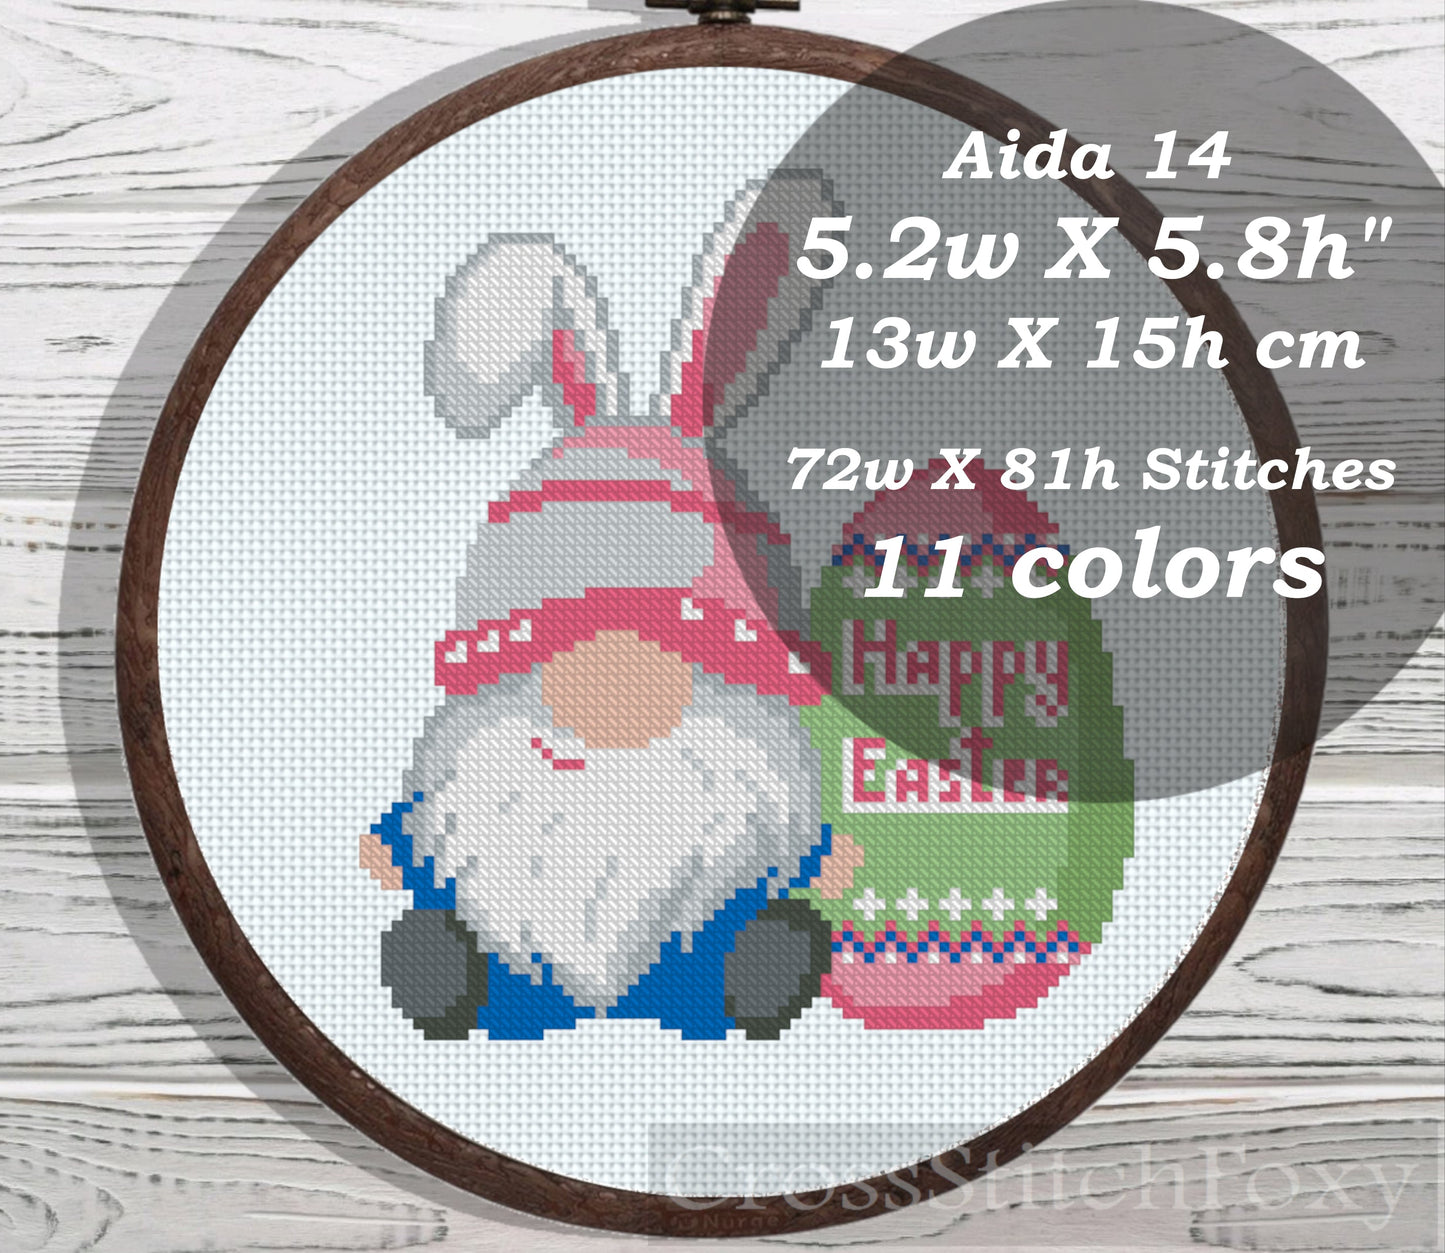 Small Happy Easter Gnome cross stitch pattern